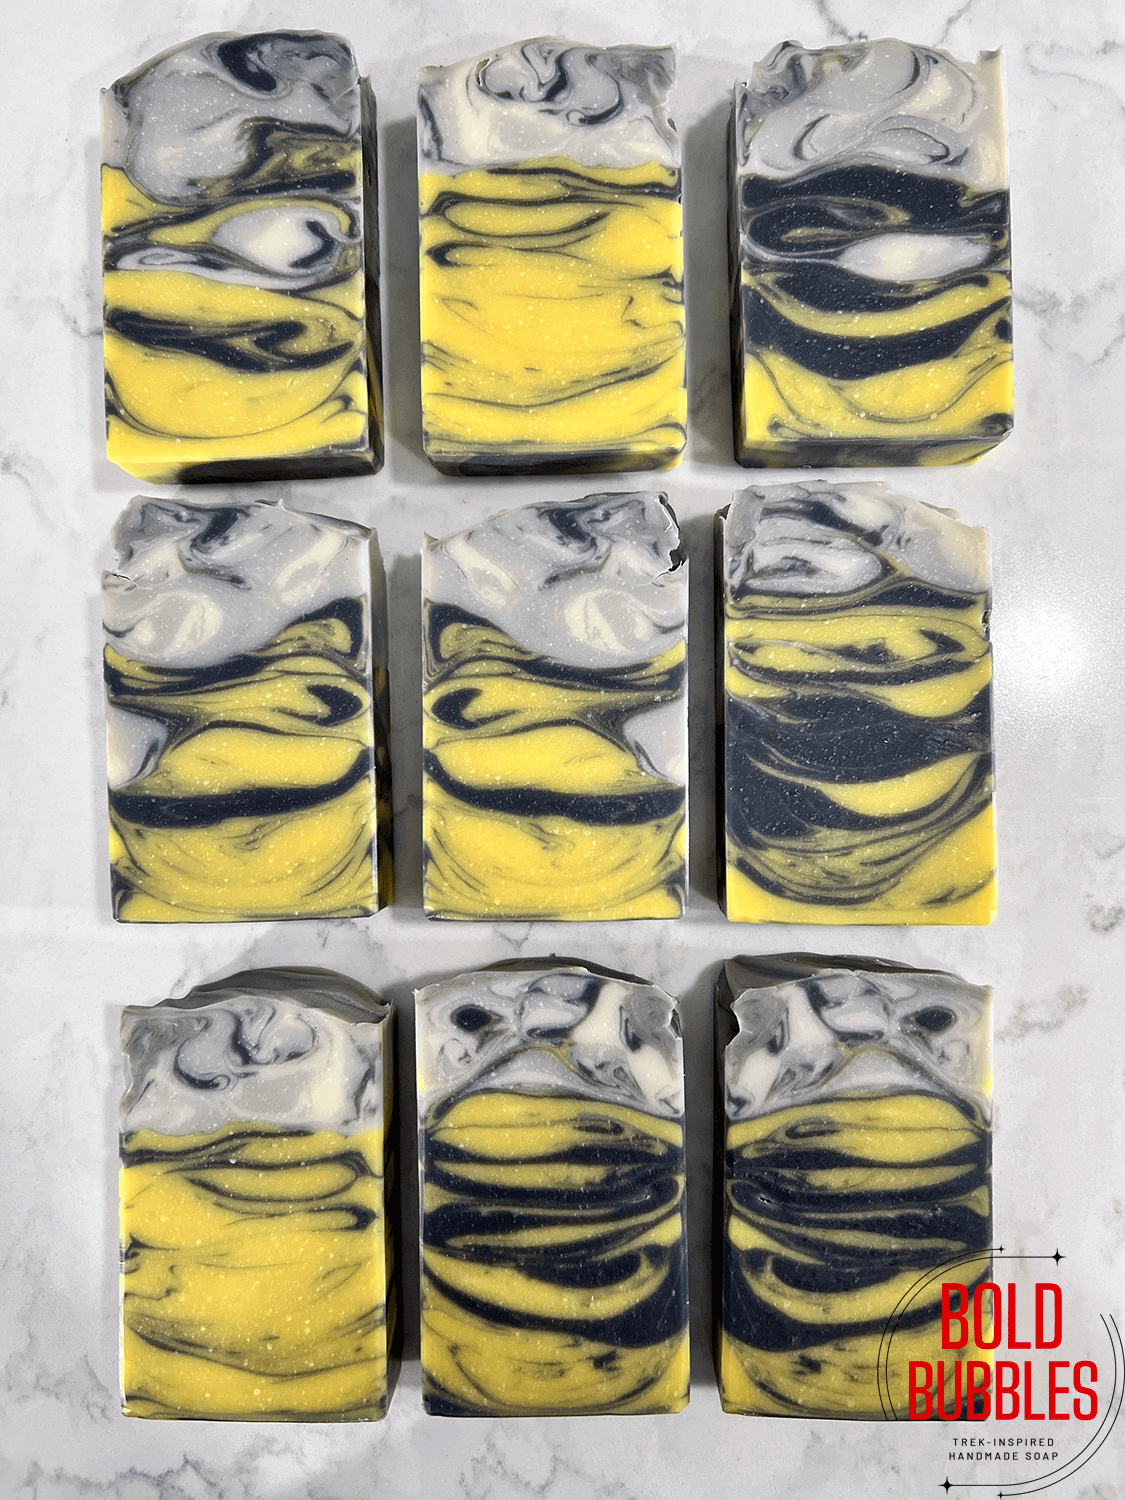 Yellow, white, and grey soap inspired by Captain Pike from "Strange New Worlds," and especially the "mount" that is Pike's salt and pepper hair.